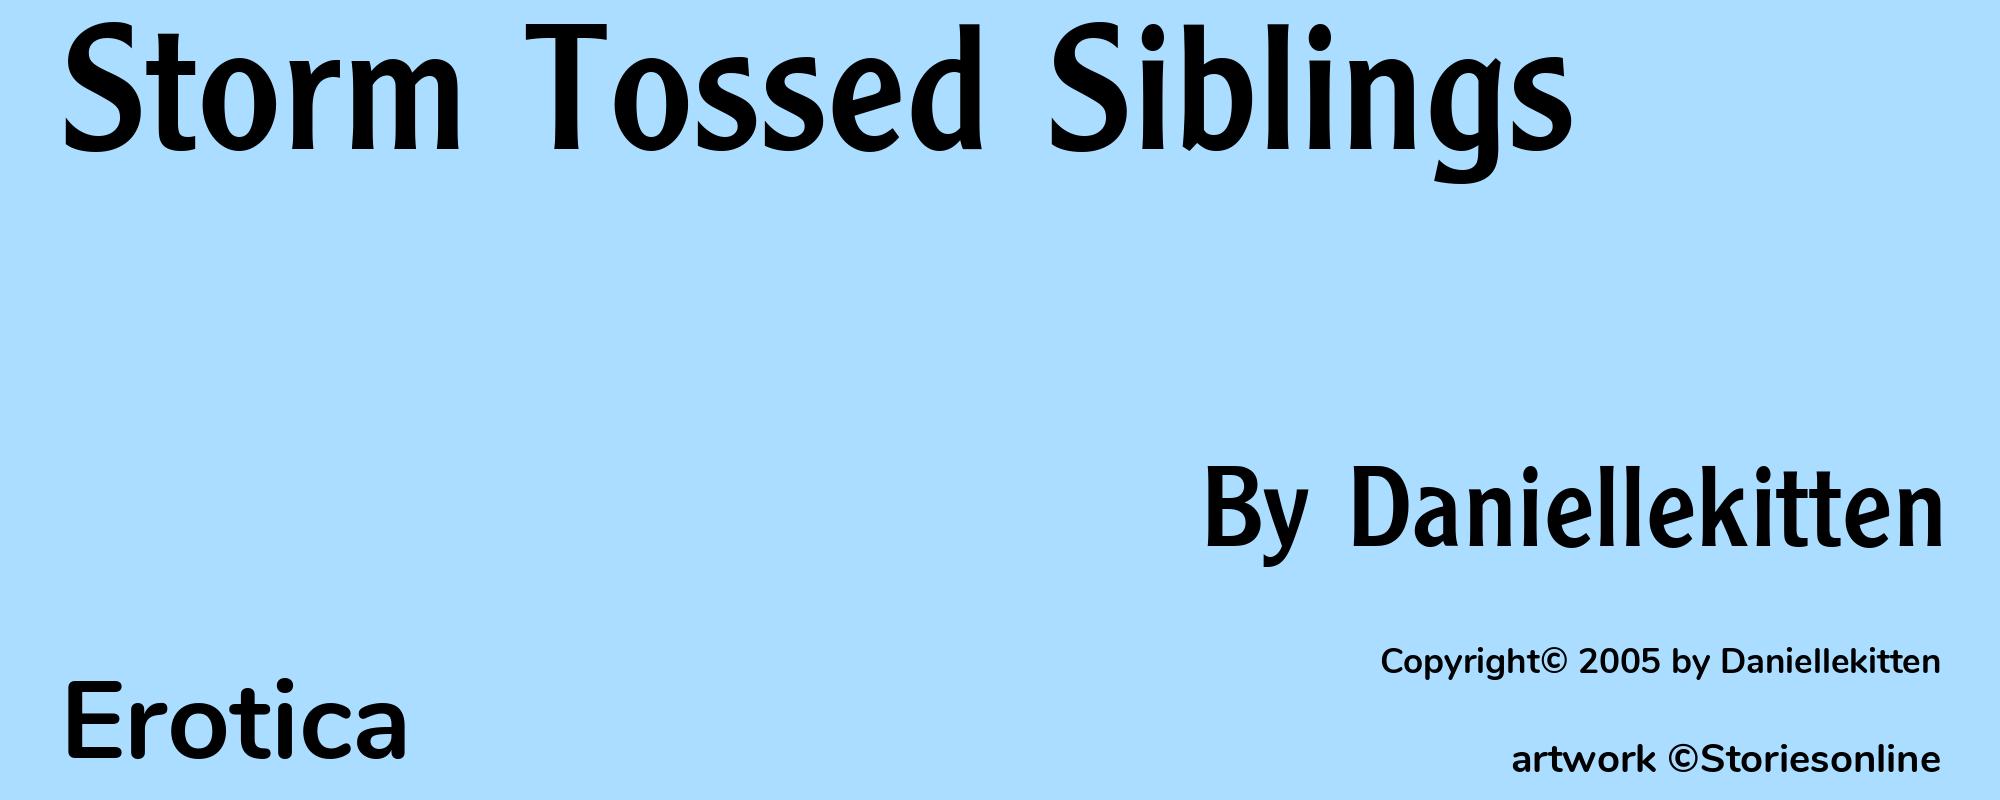 Storm Tossed Siblings - Cover